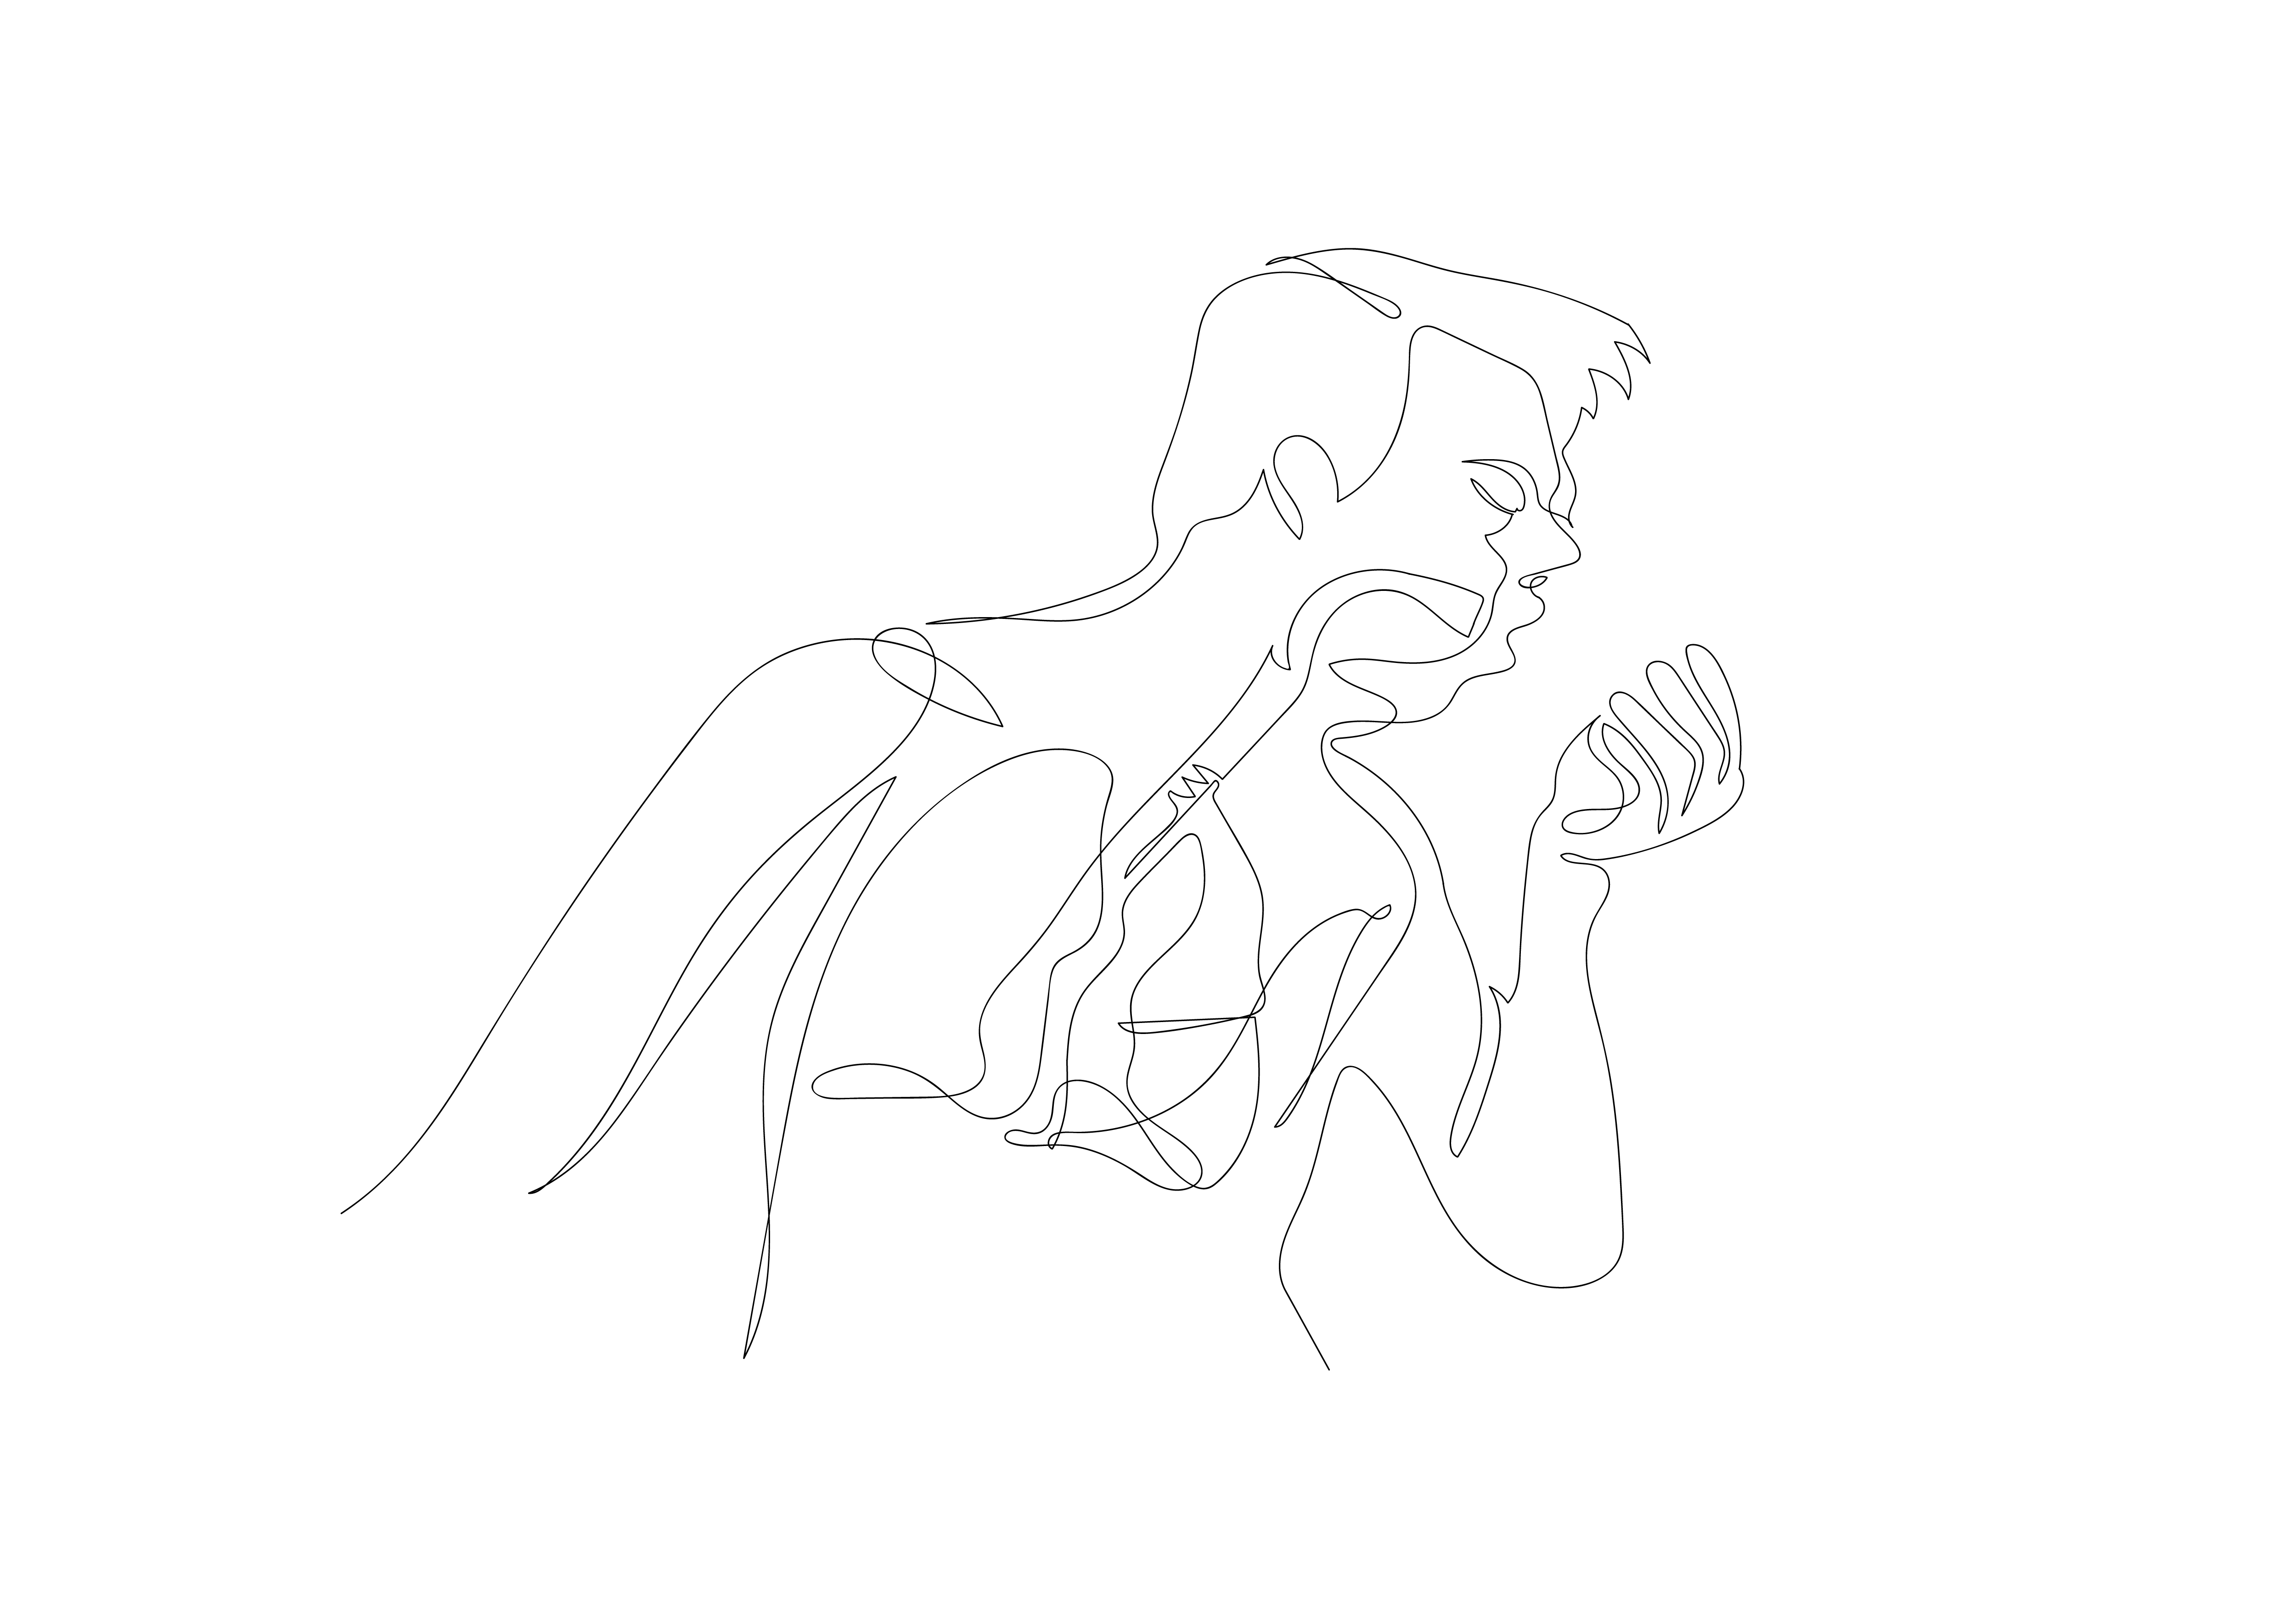 Continuous line drawing  of a coughing man showing  his lungs